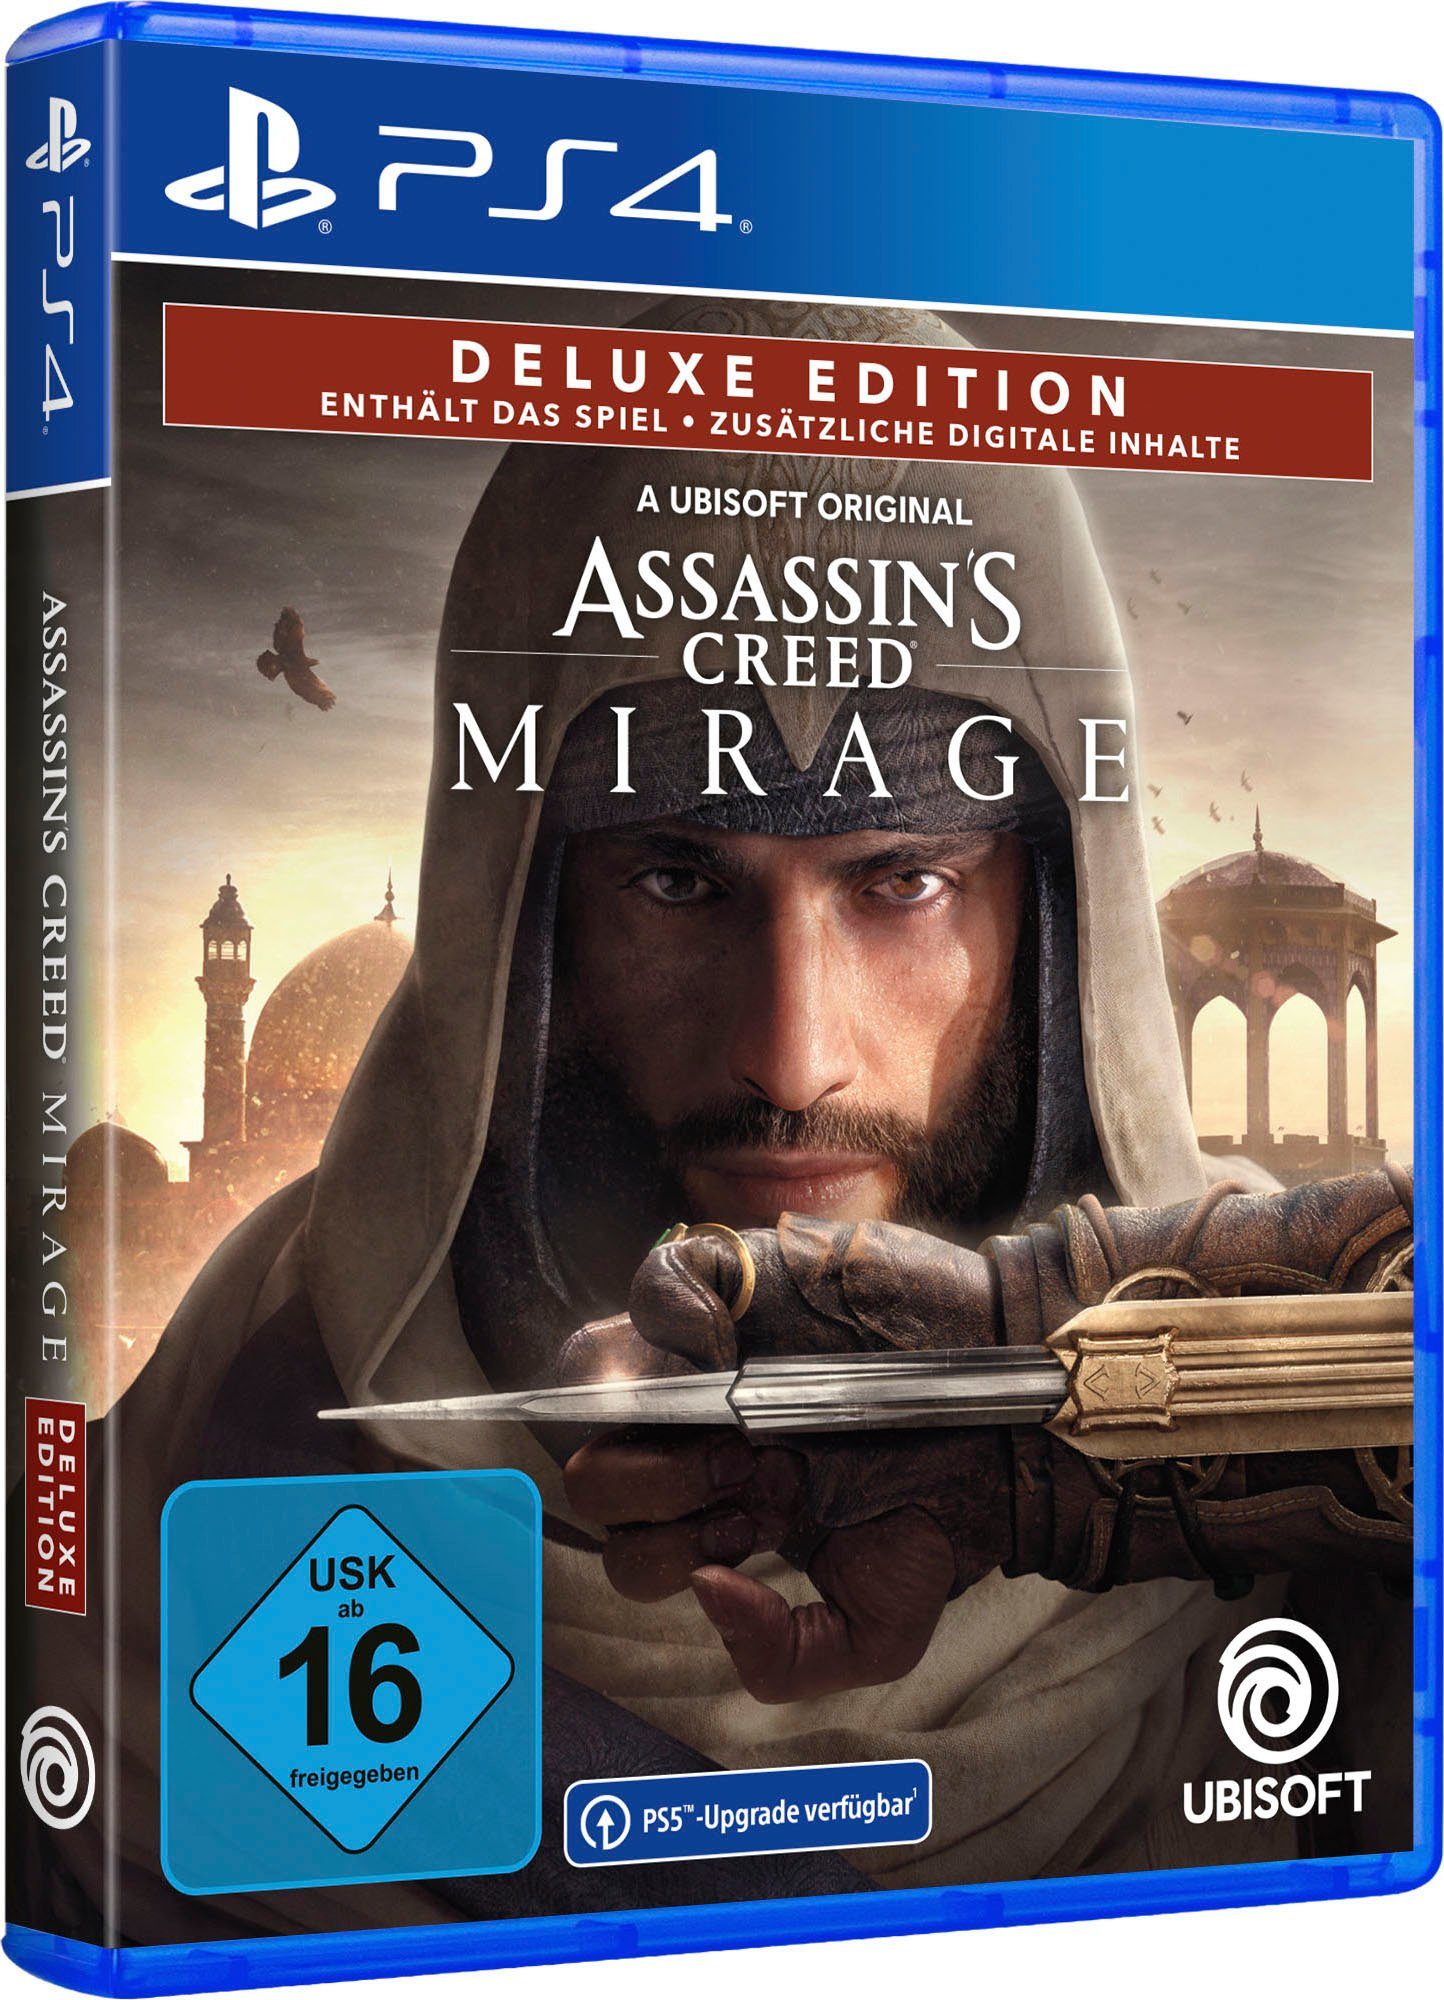 UBISOFT Assassin's Creed Mirage Deluxe Edition (kostenloses PlayStation PS5) - auf Upgrade 4